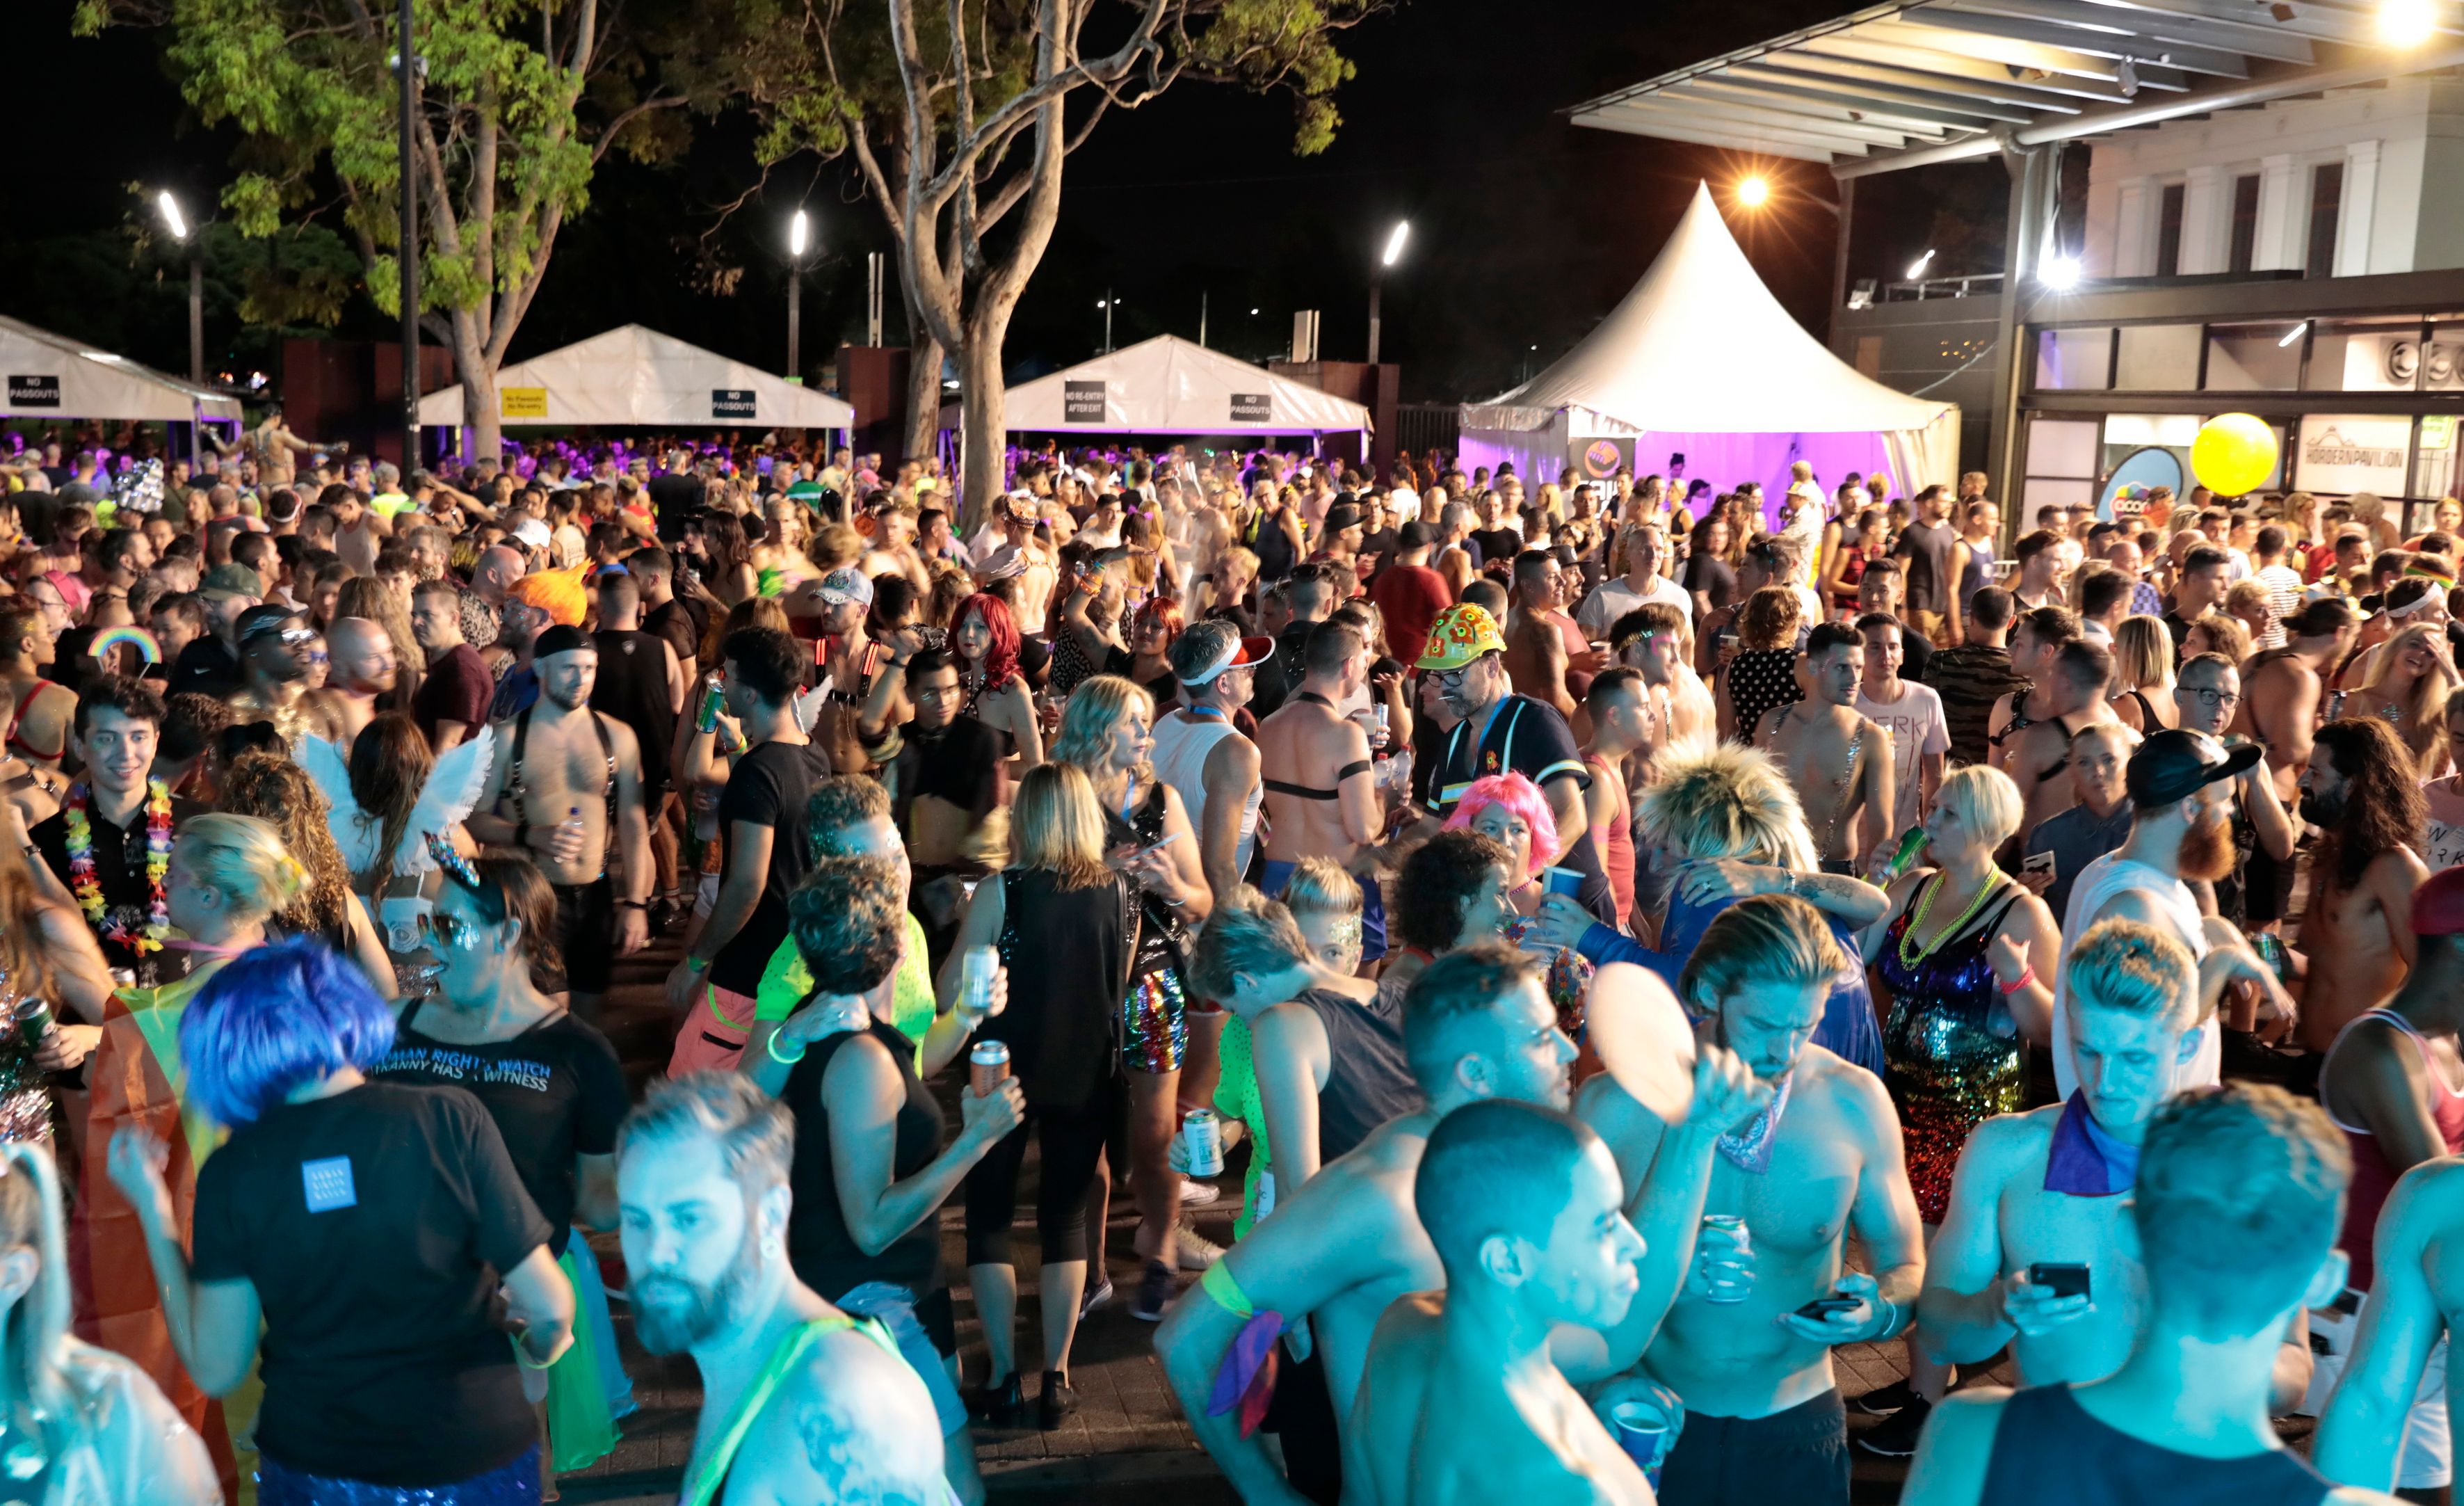 Sydney Gay and Lesbian Mardi Gras considers changing name in bid to be more “inclusive”